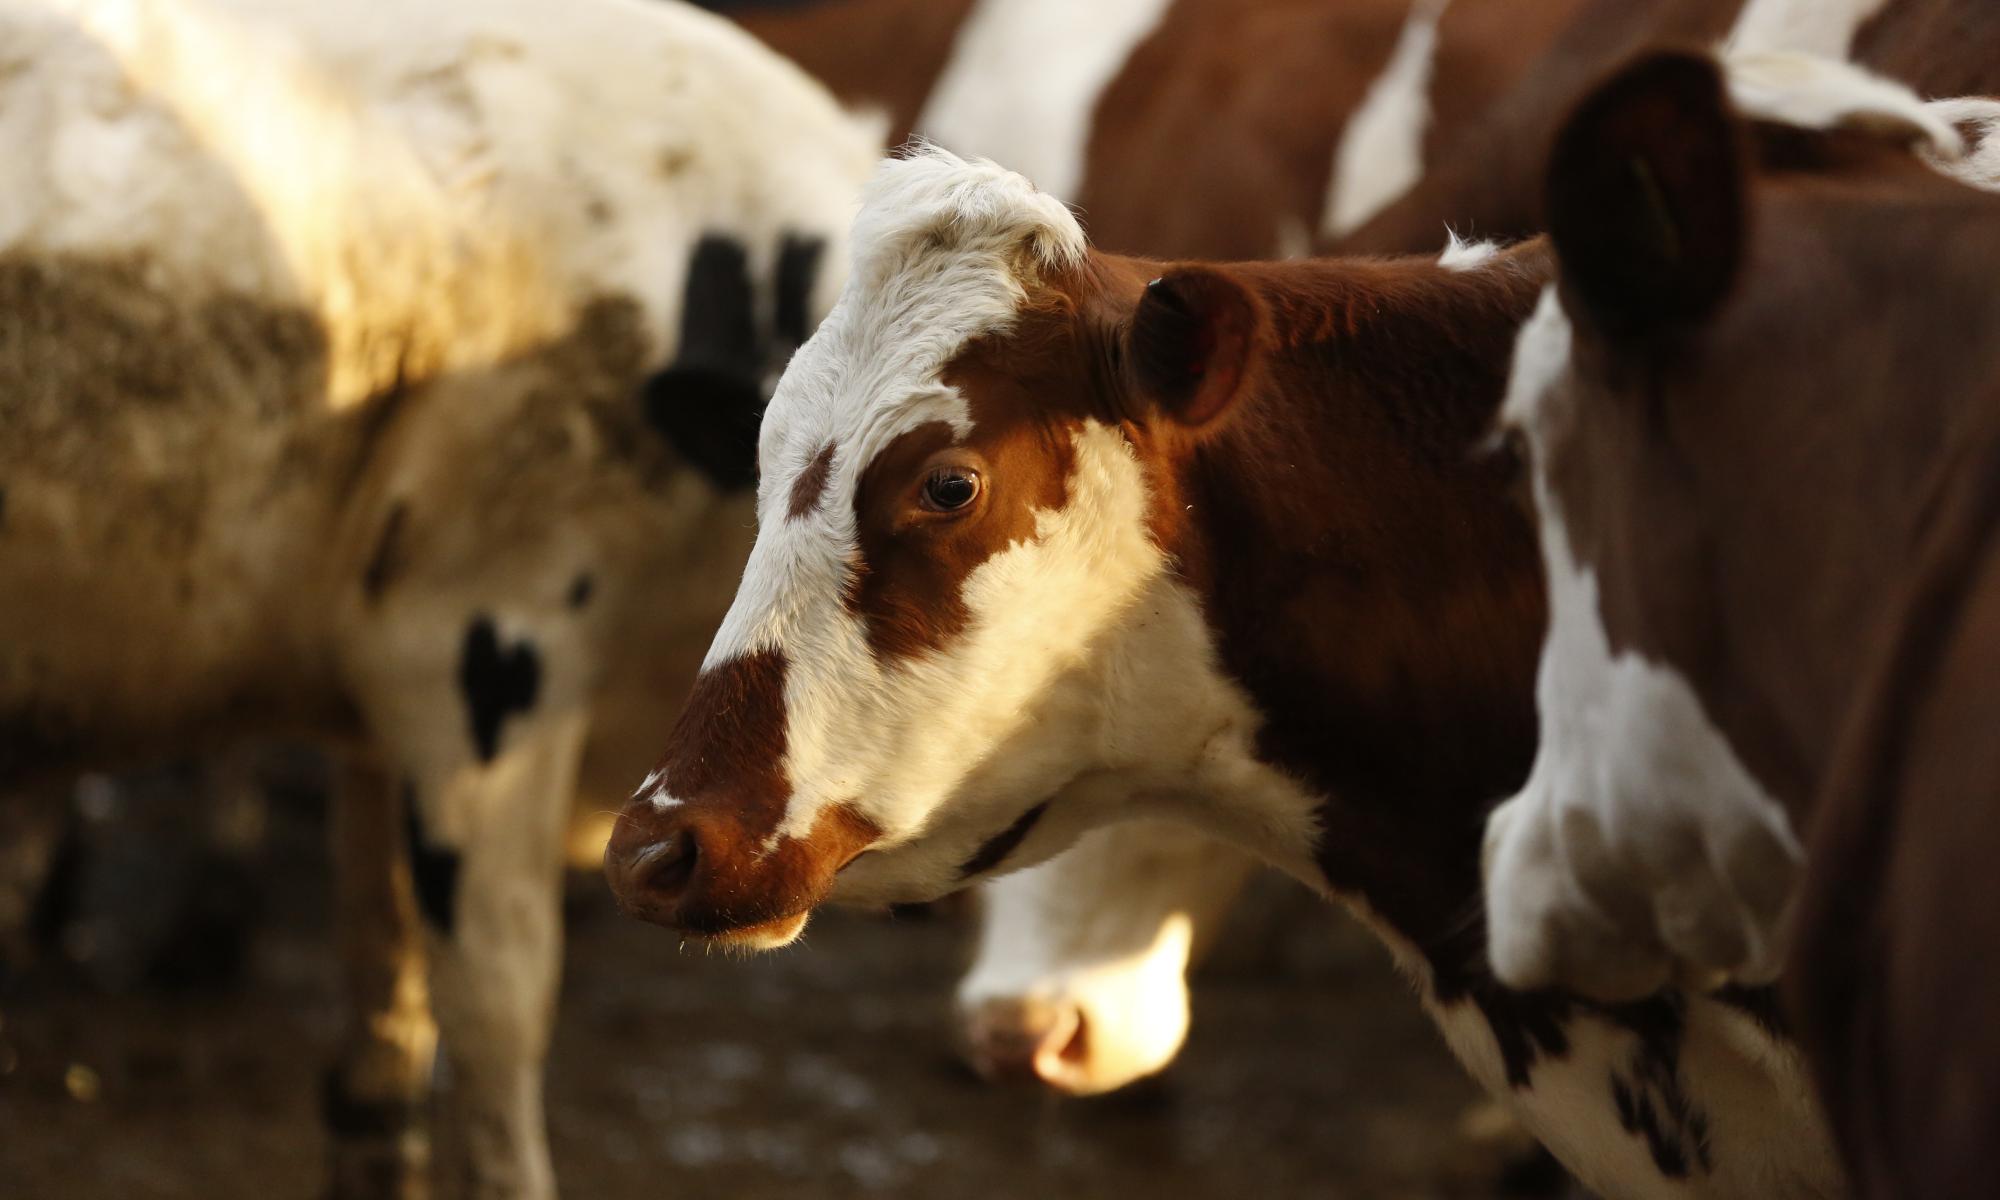 Emissions from 13 dairy firms match those of entire UK, says report